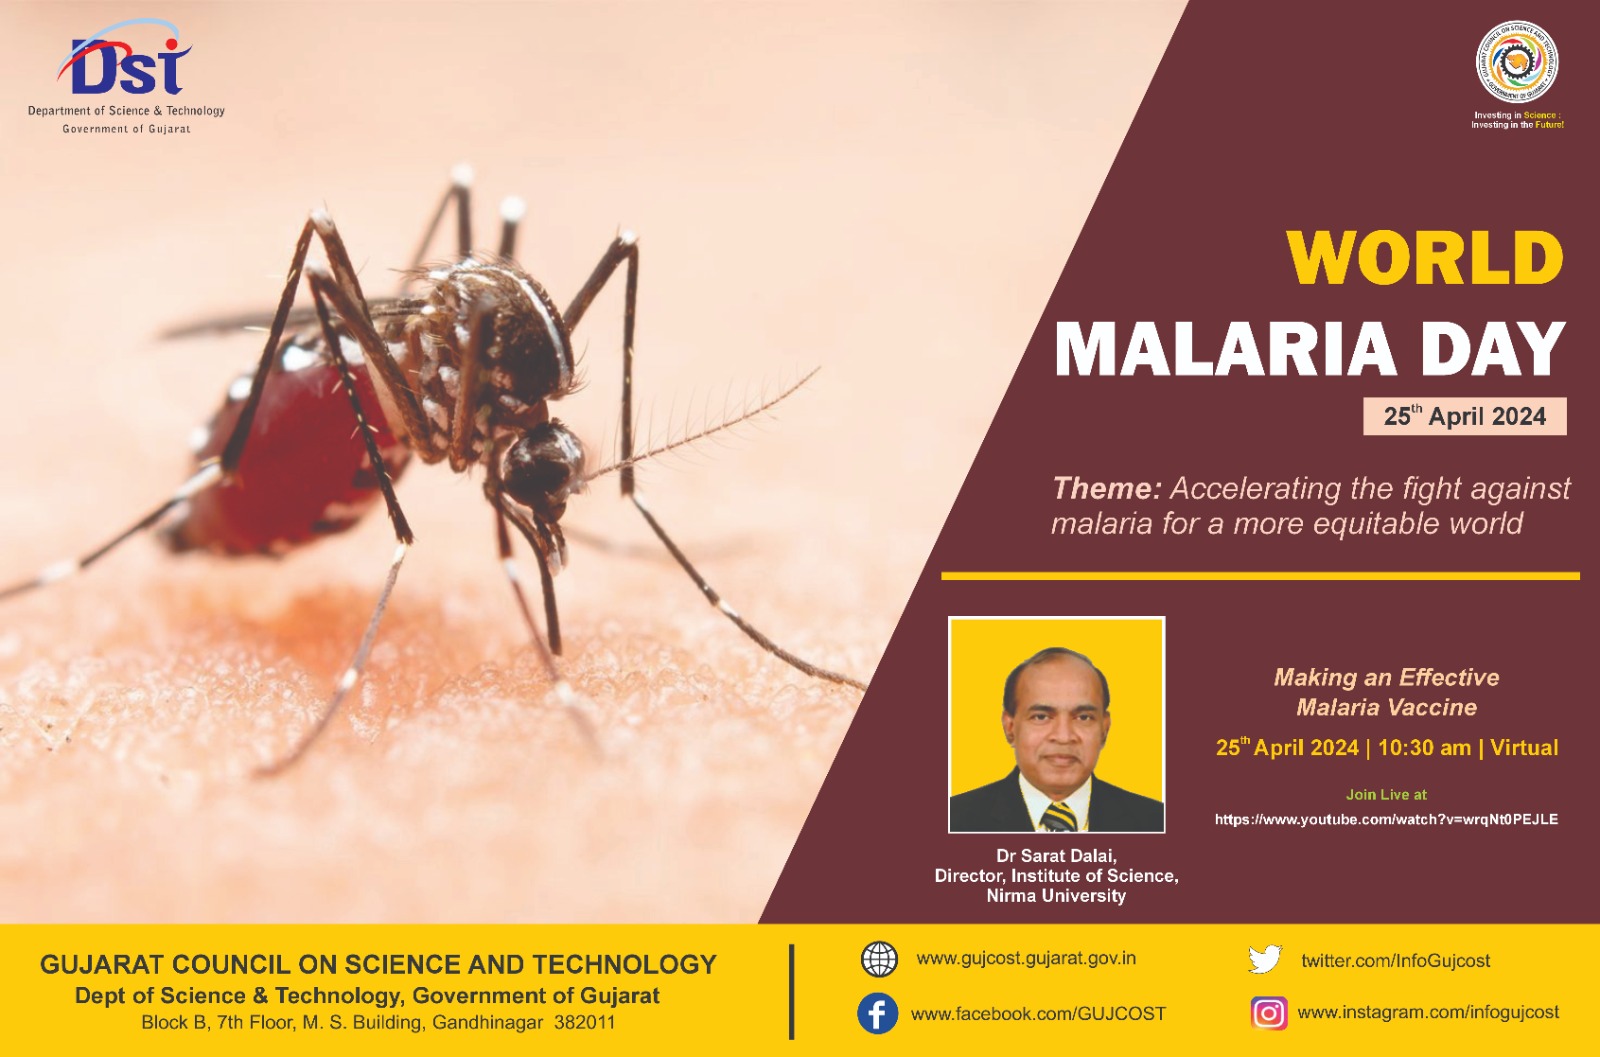 World Malaria Day Lecture by Prof. Dalai organized by GUJCOST